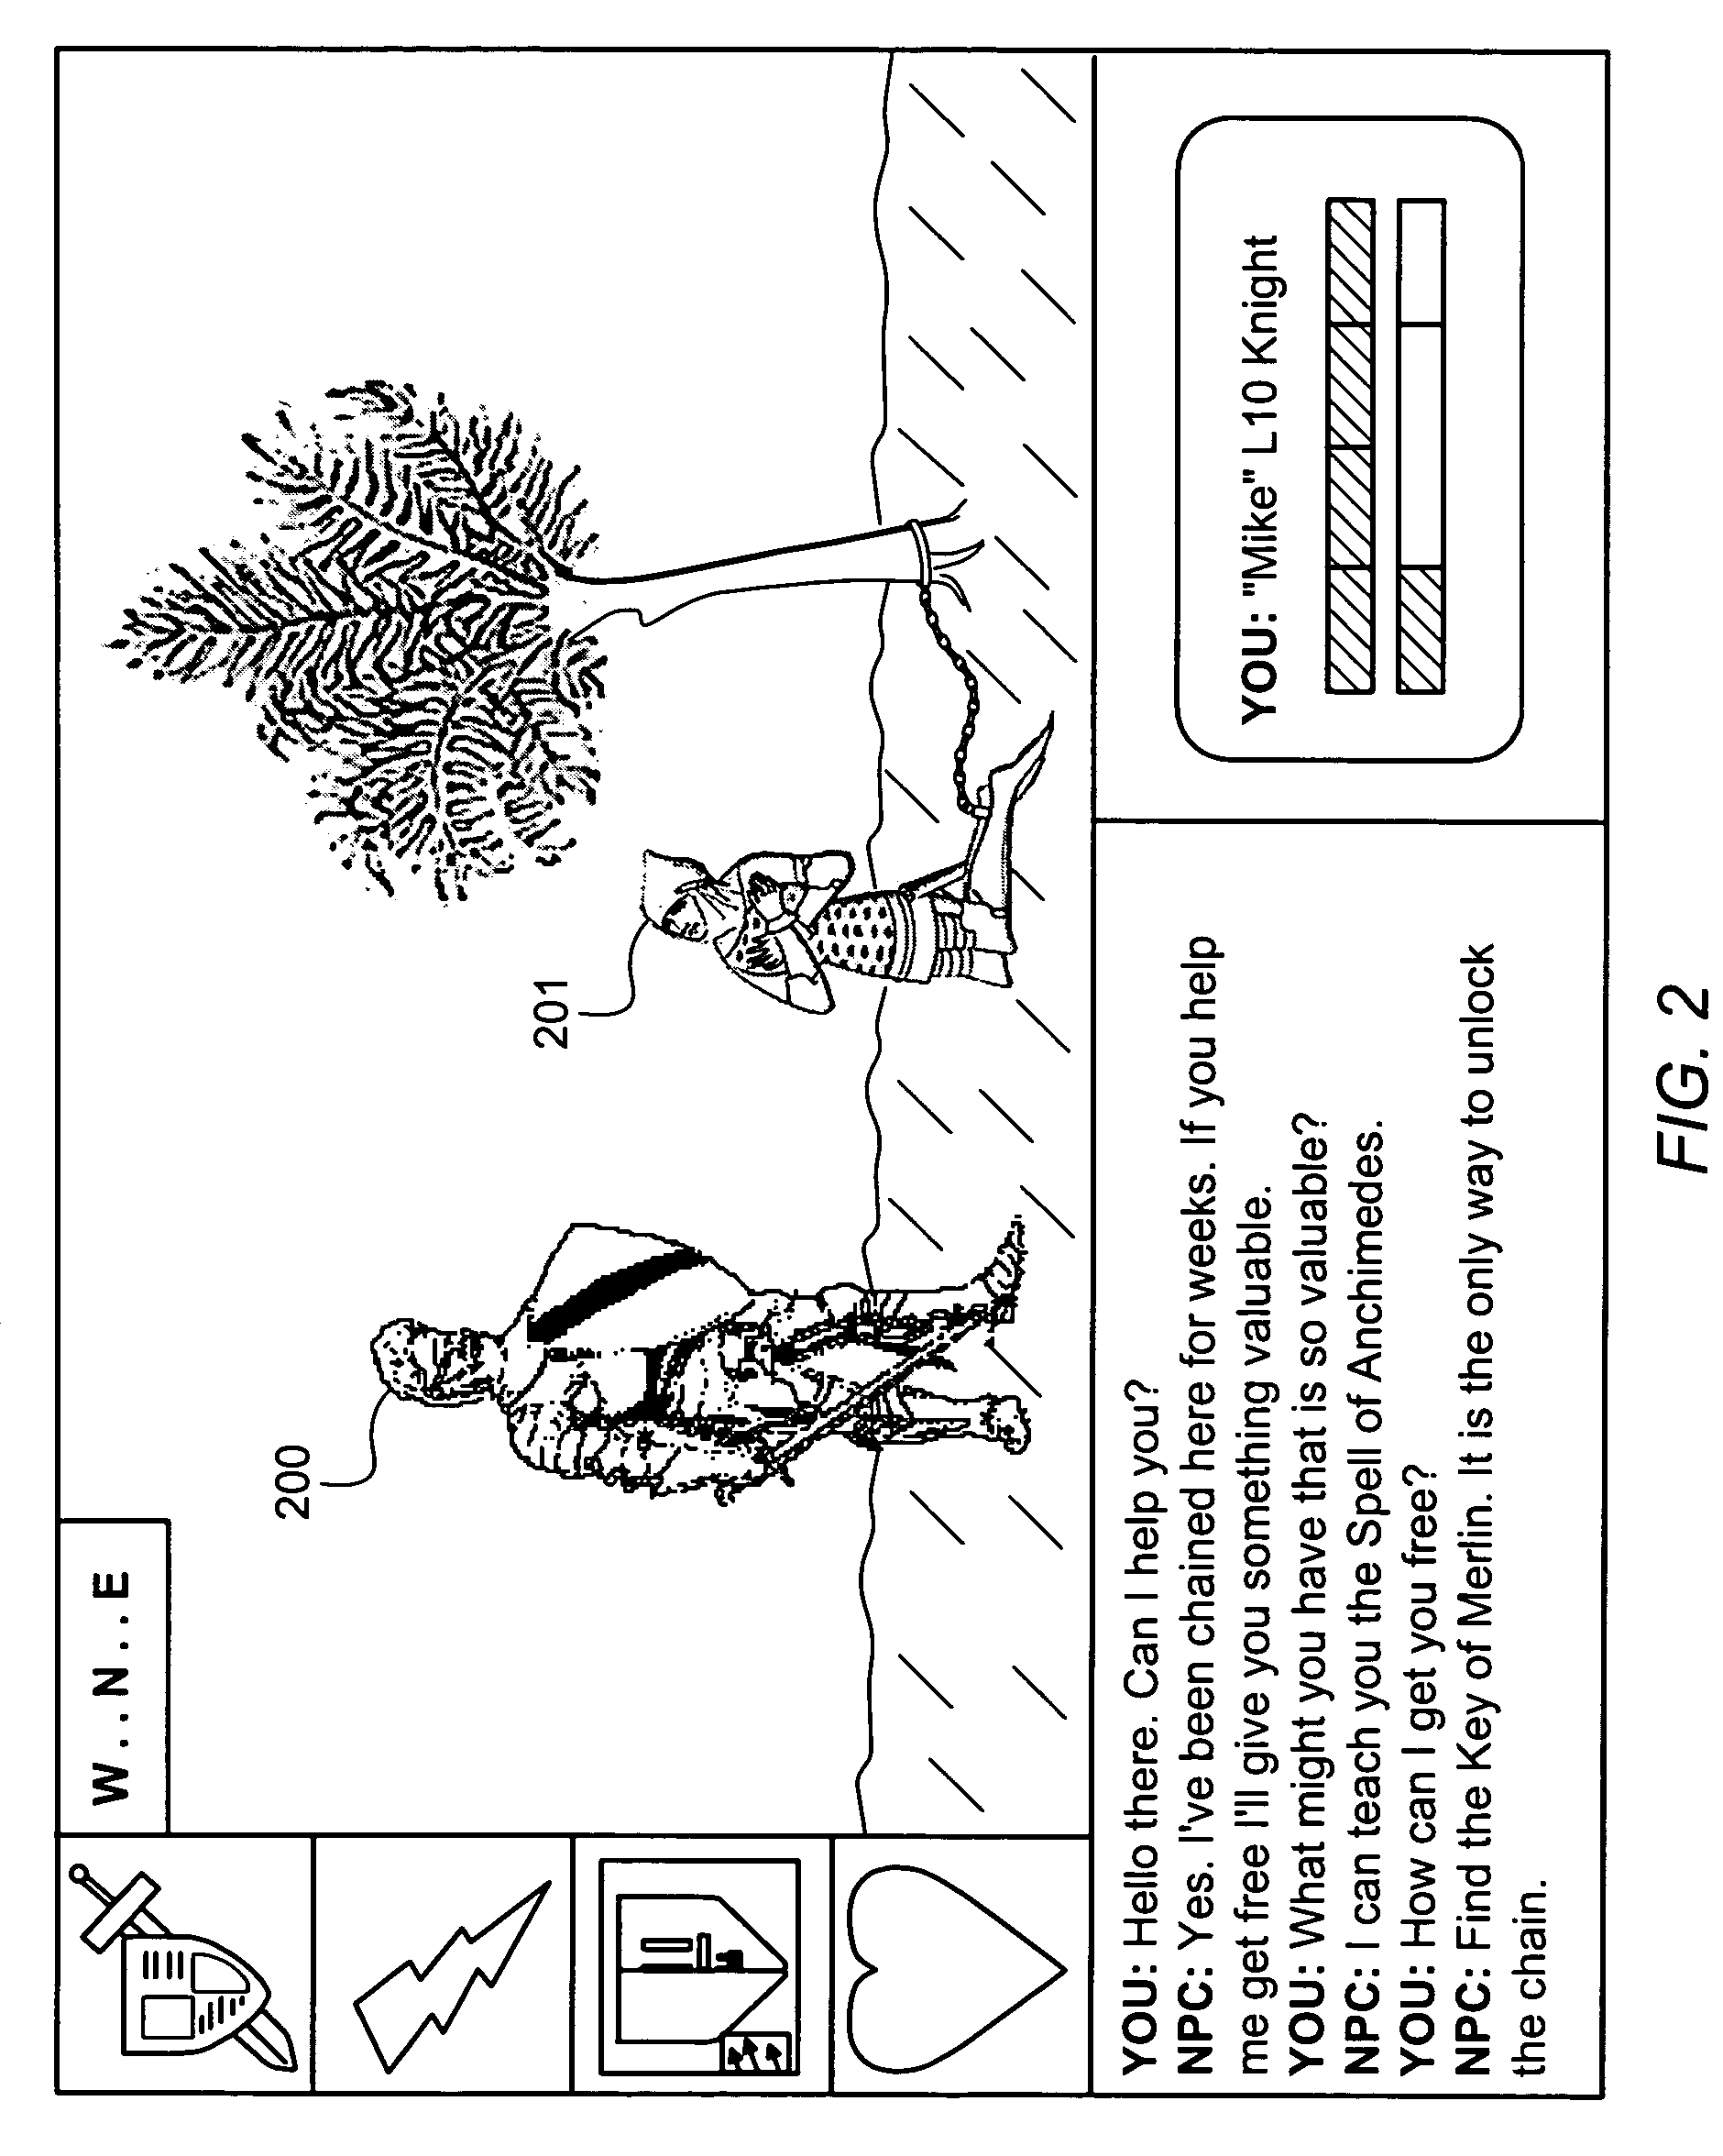 Method for dynamic content generation in a role-playing game